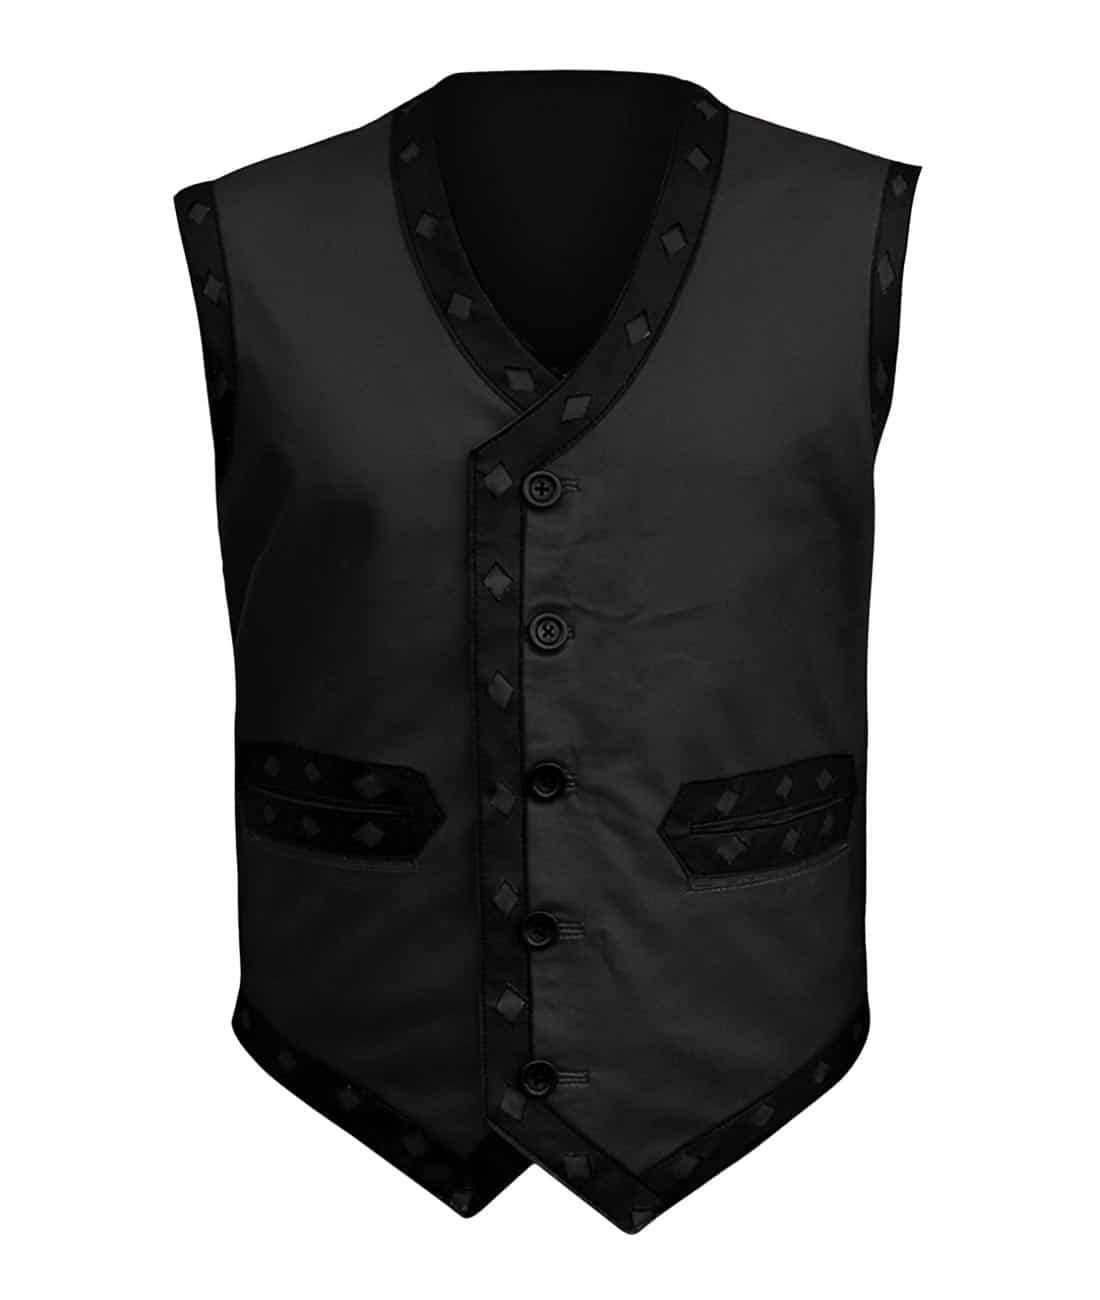 The Warriors Vest Replica for Sale | XtremeJackets